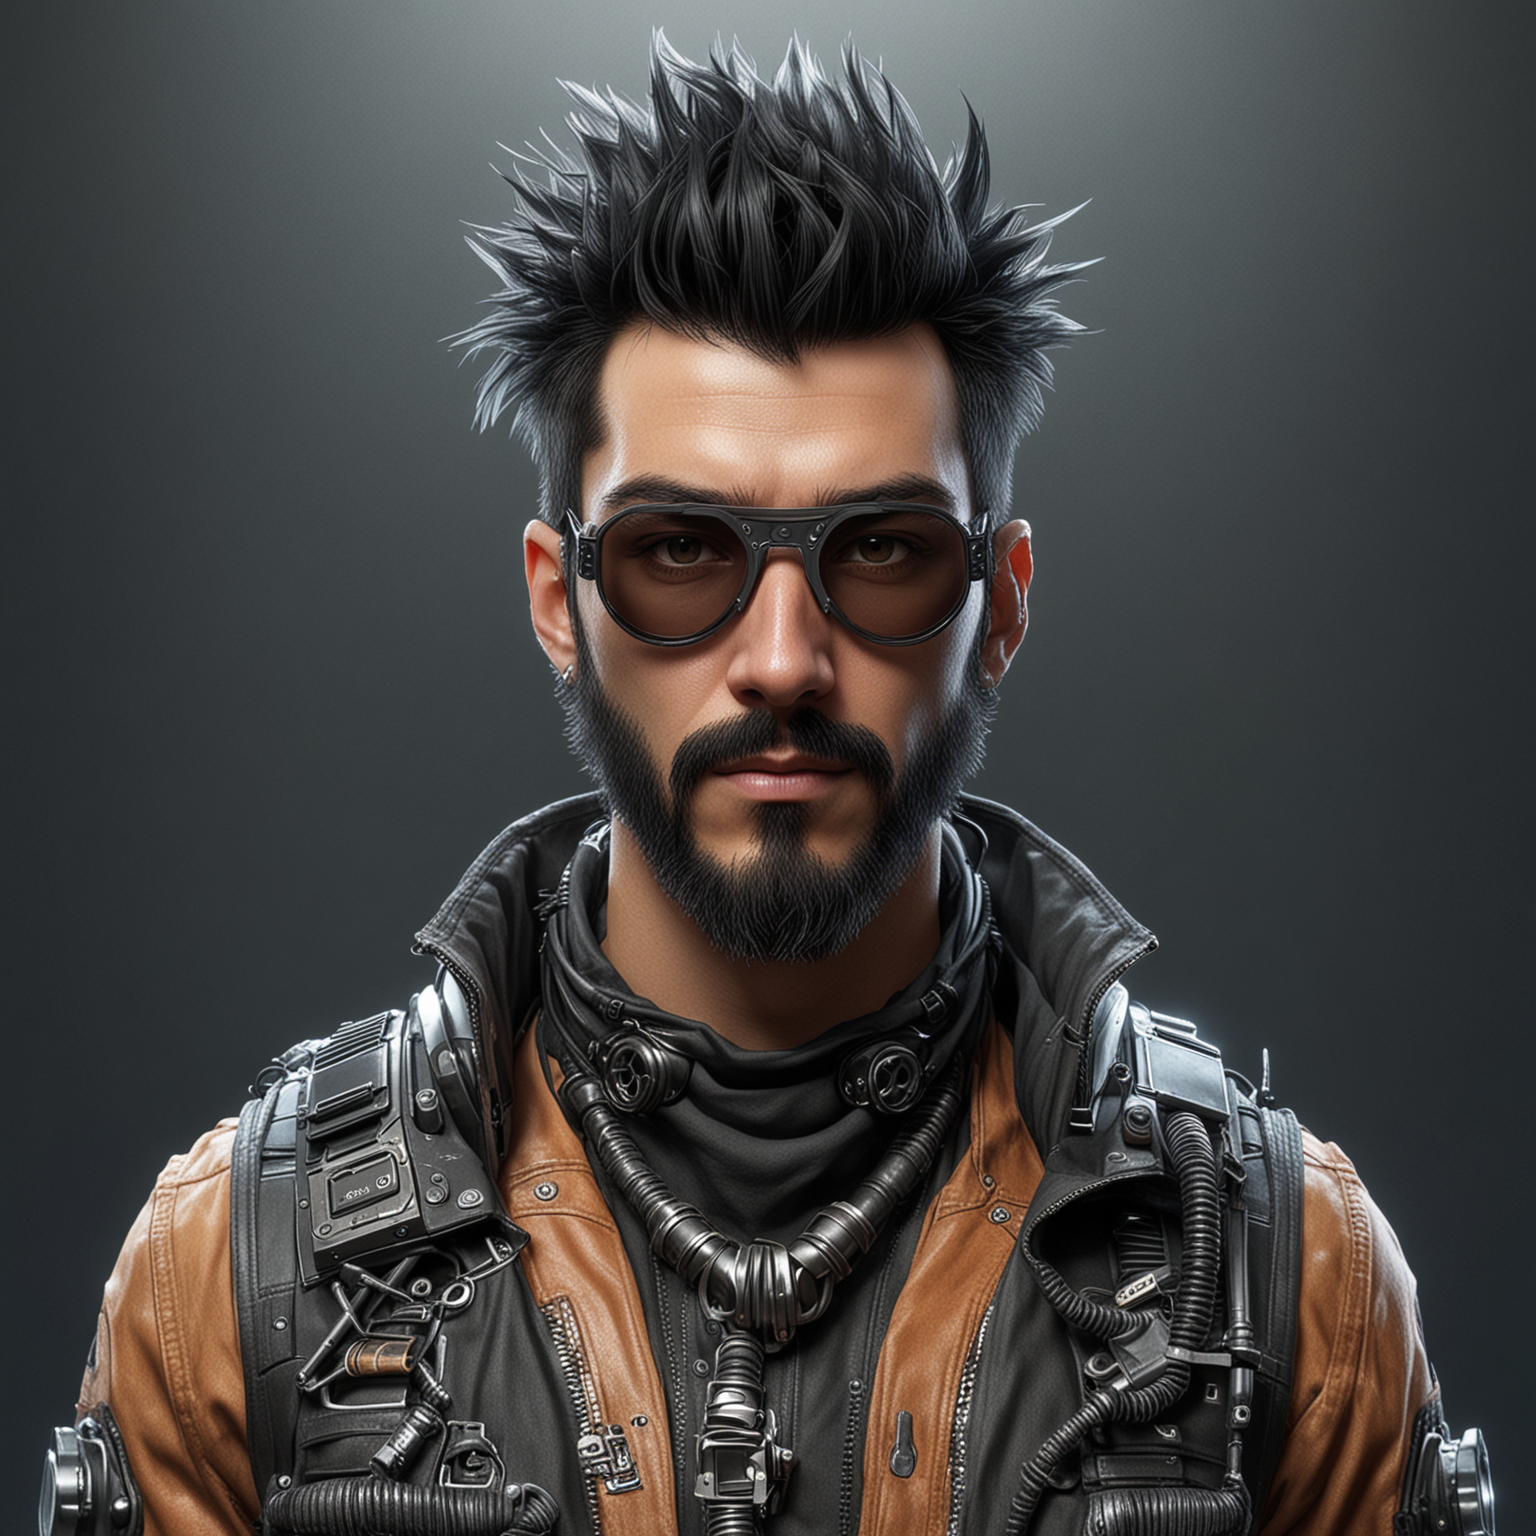 Cyberpunk Cowboy with Mohawk and Goggles in Mechanics Jumpsuit